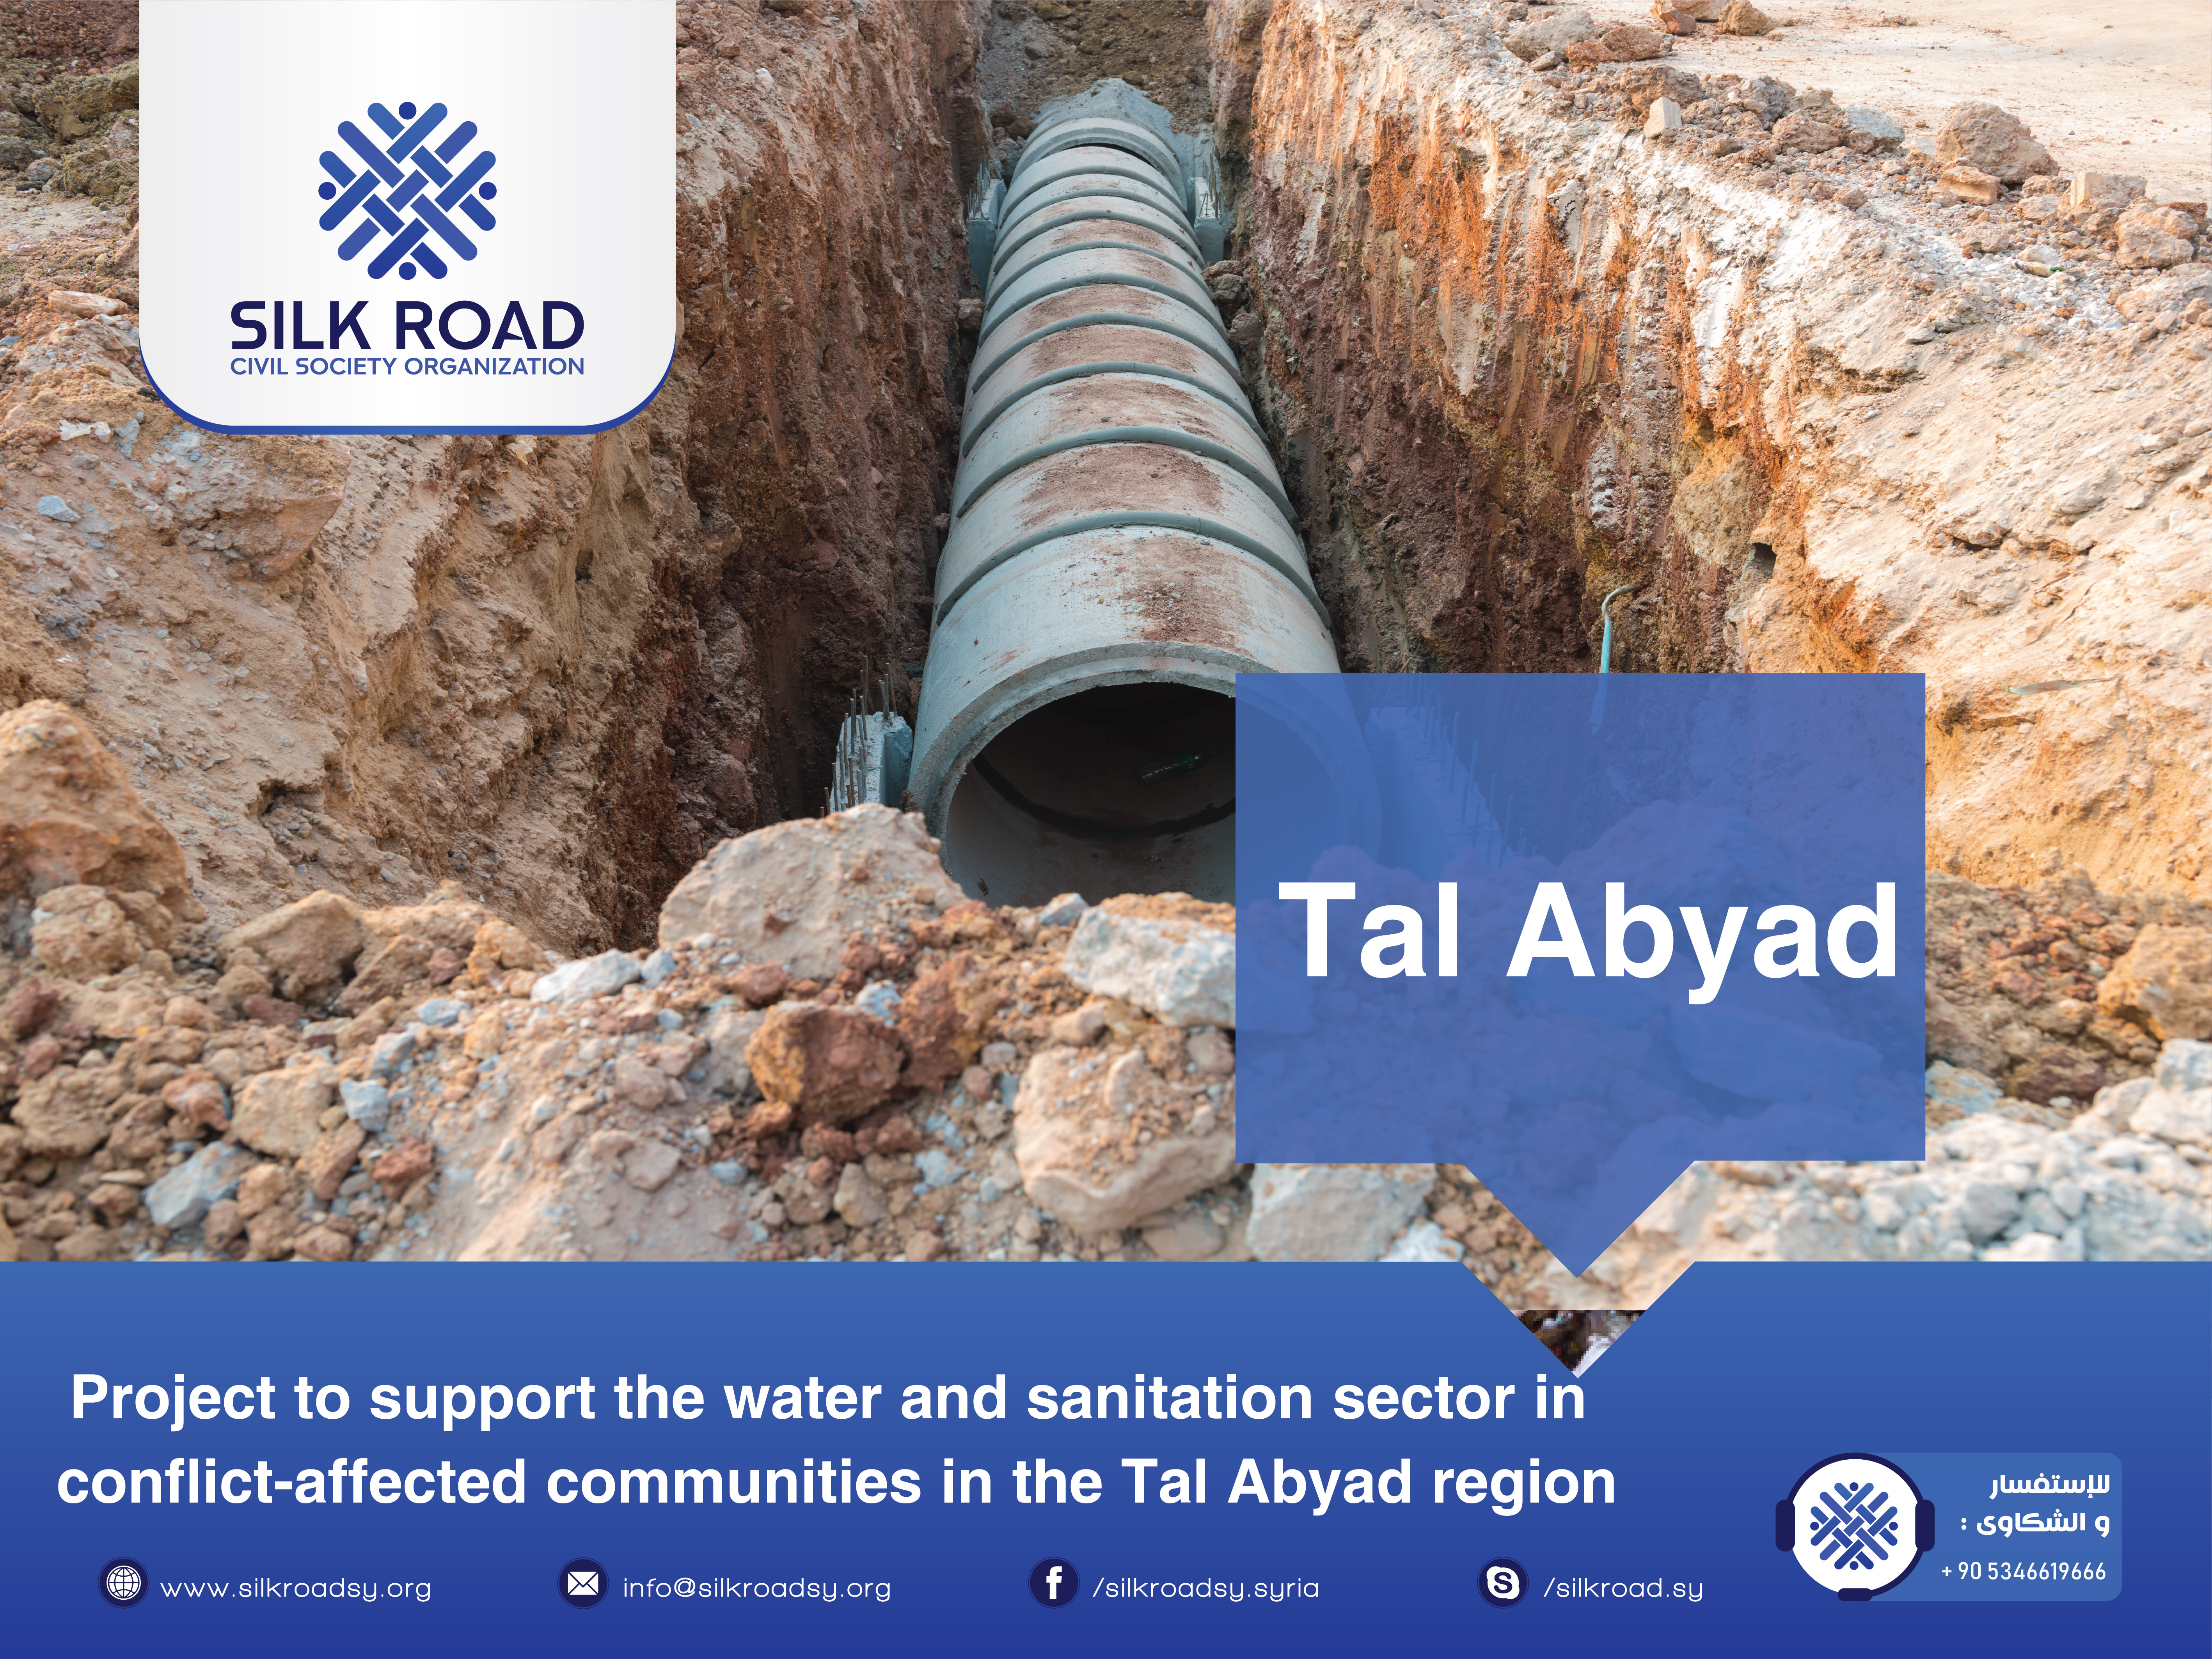 Project to support the water and sanitation sector in conflict-affected communities in the Tal Abyad region